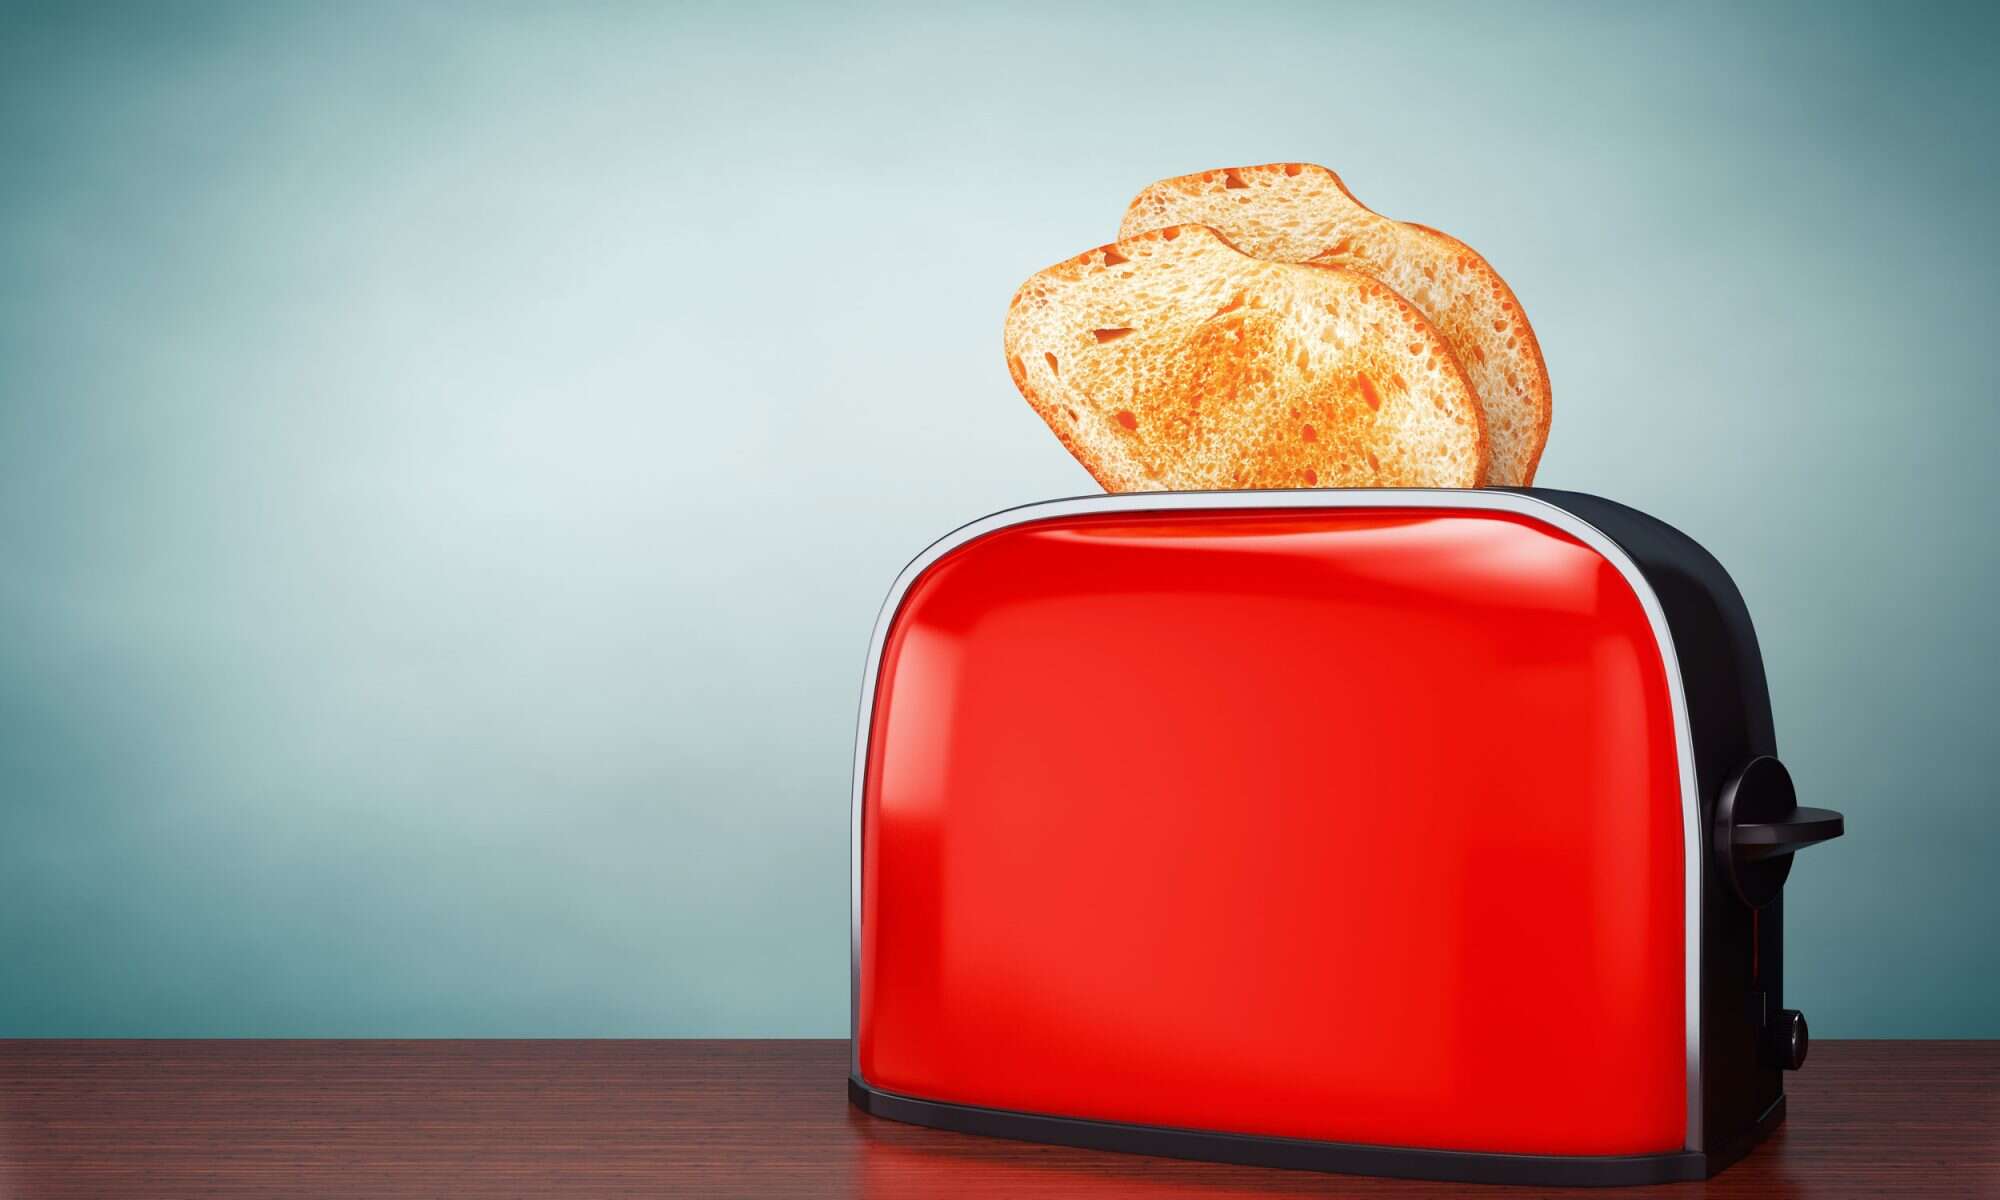 A Concise History of the Modern Toaster